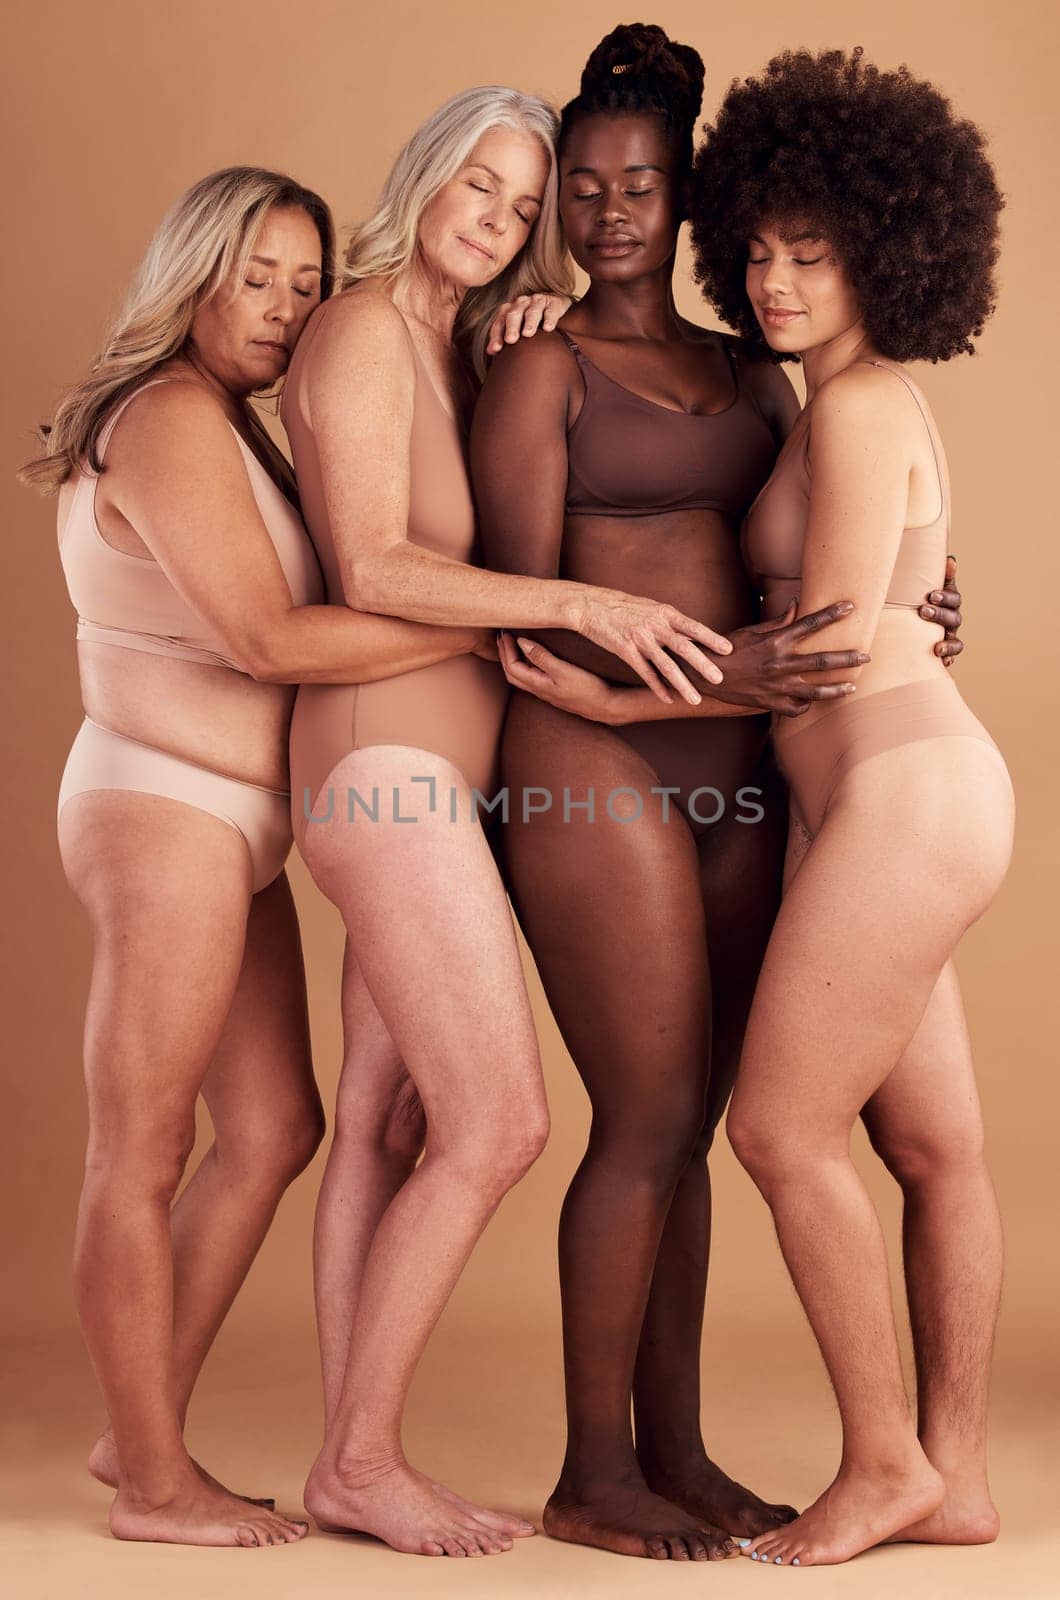 Beauty, diversity hug and body positive women, girl or friends happy together in solidarity, self love and support. Self care, lingerie and woman empowerment group of people embrace for acceptance.